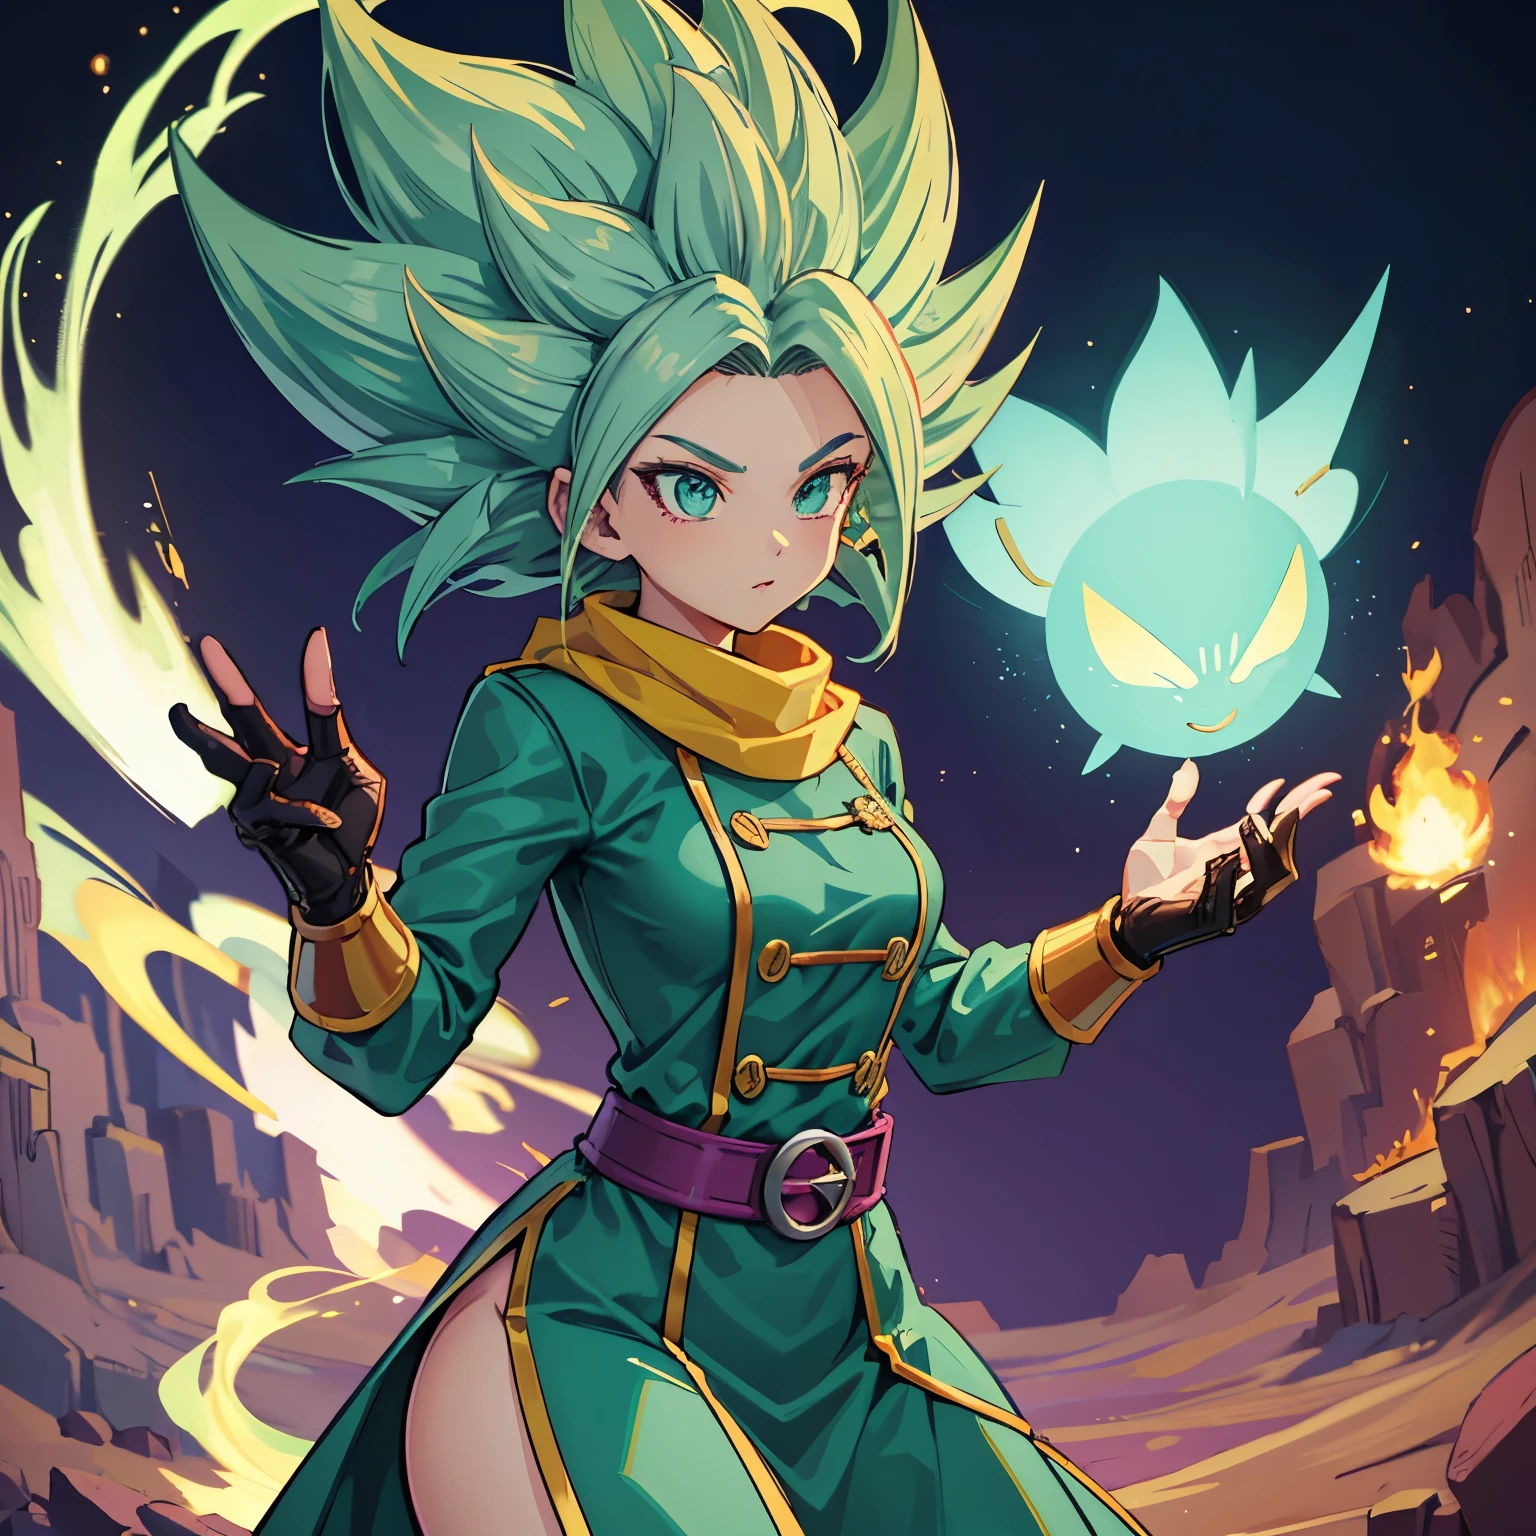 Female, woman, race: “Cerealian from Dragon Ball Super Manga”, mint green hair, has light skin, wavy mint green hair, long hair, large hair bangs, one mint green eye and one red eye, attire consists of a dark green shirt under a green coat with yellow buttons, a long brown scarf, a dual-buckled belt, and brown gloves and boots